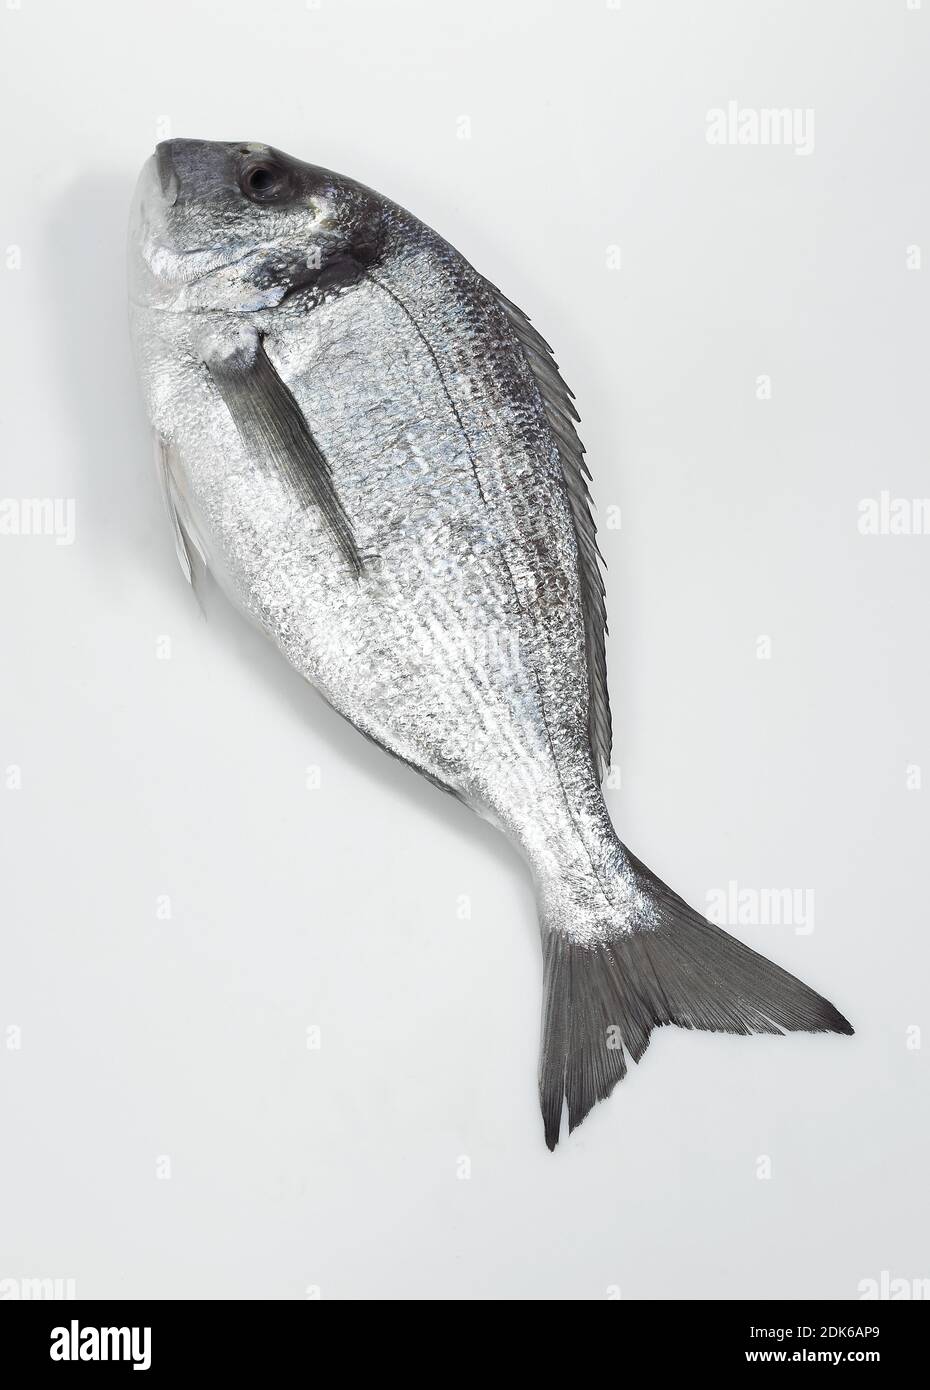 Gilthed Bream, sparus auratus, Fresh Fish against White Background Stock Photo